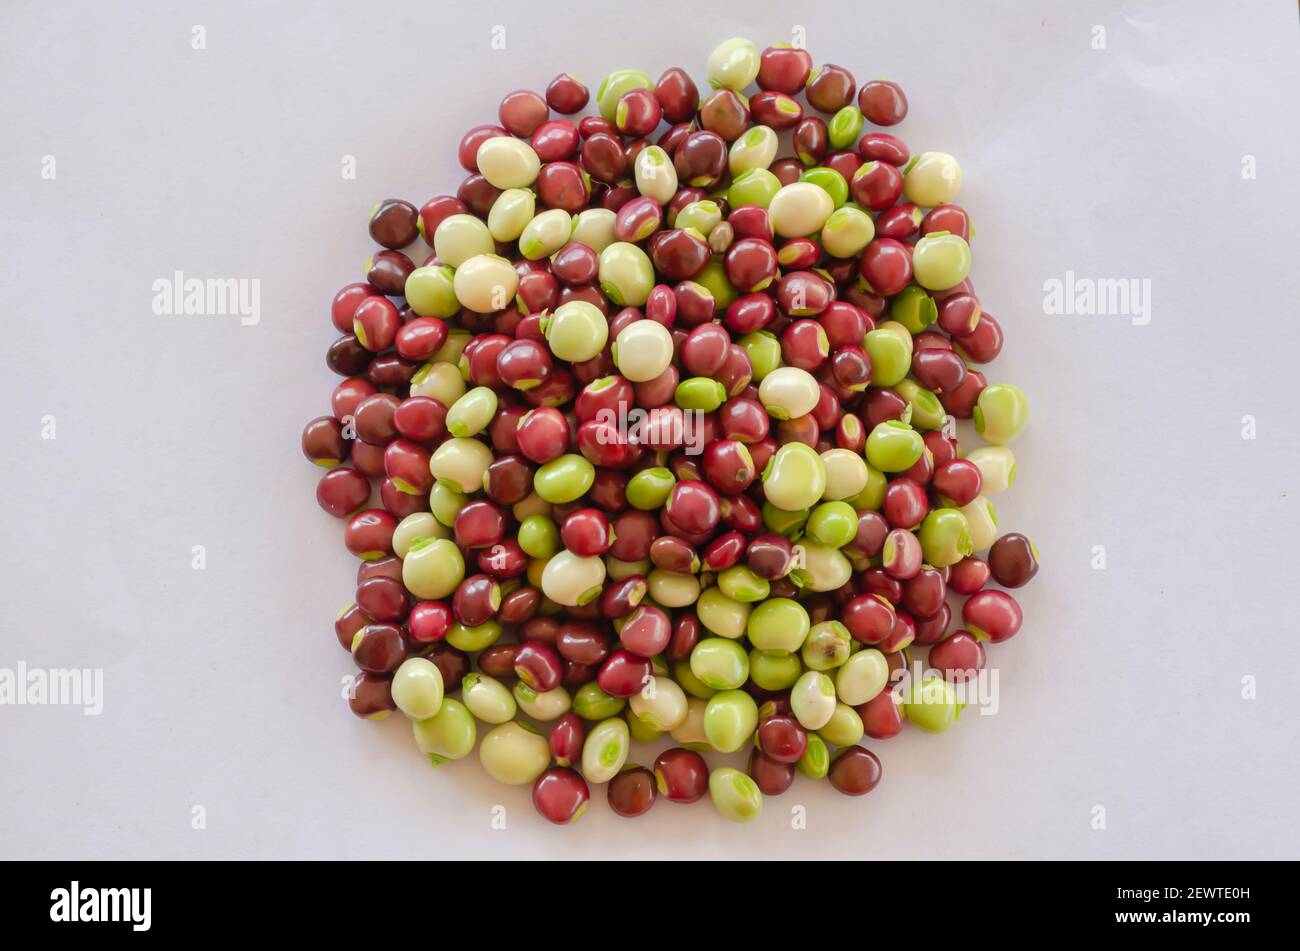 A Mix Of Red And Green Pigeon Peas Stock Photo